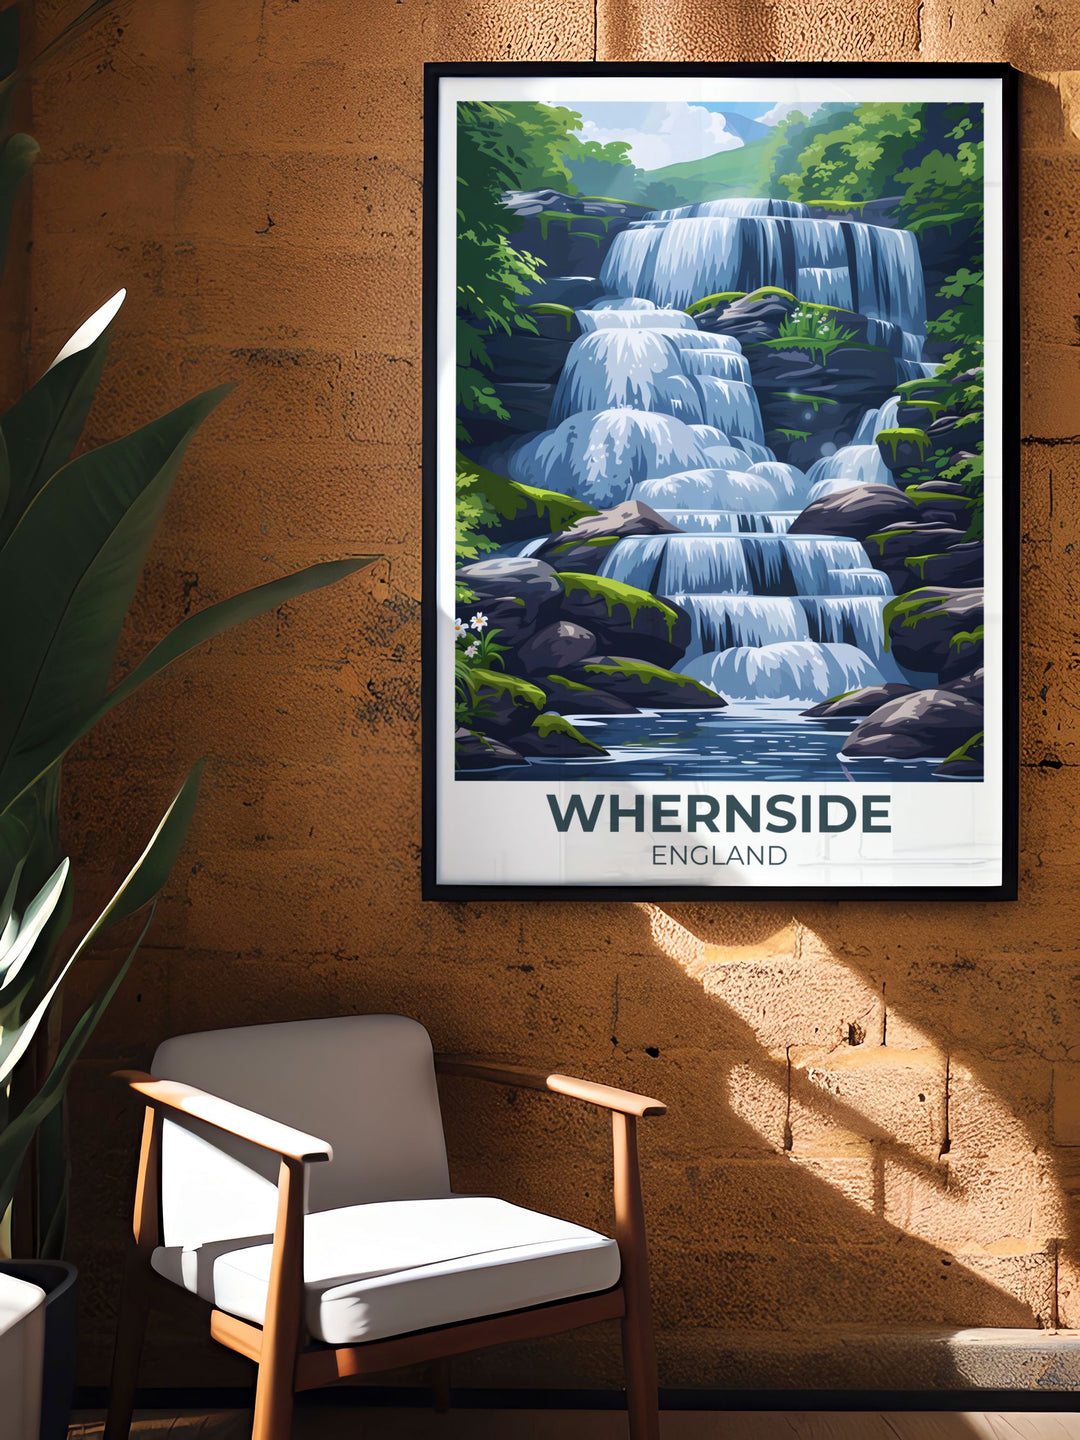 Fine art print of Whernside, showcasing the peaks rugged landscapes and scenic trails. A beautiful piece that brings the essence of Yorkshires outdoor beauty into your home decor, perfect for nature lovers.